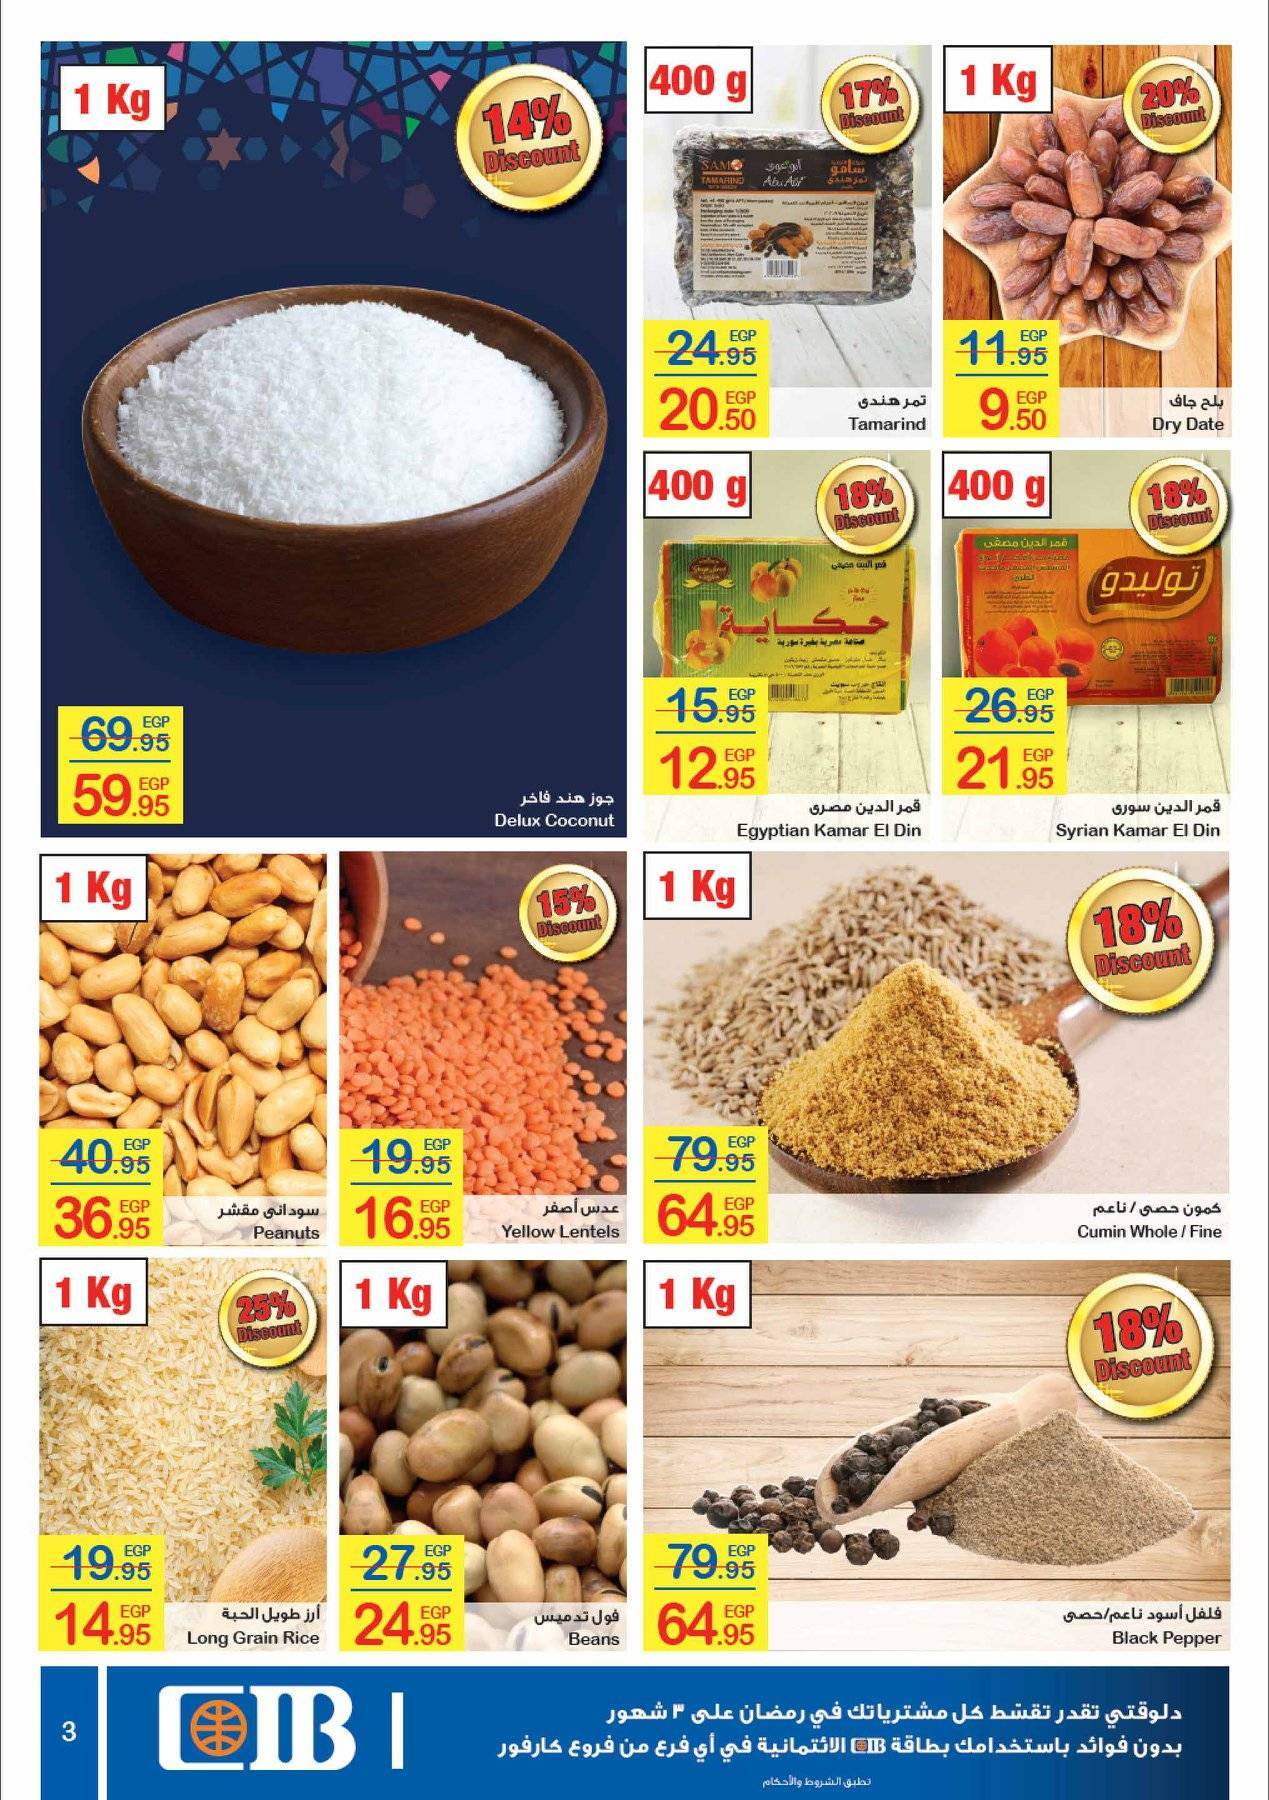 Carrefour Flyer from 24/3 till 5/4 | Carrefour Egypt 4